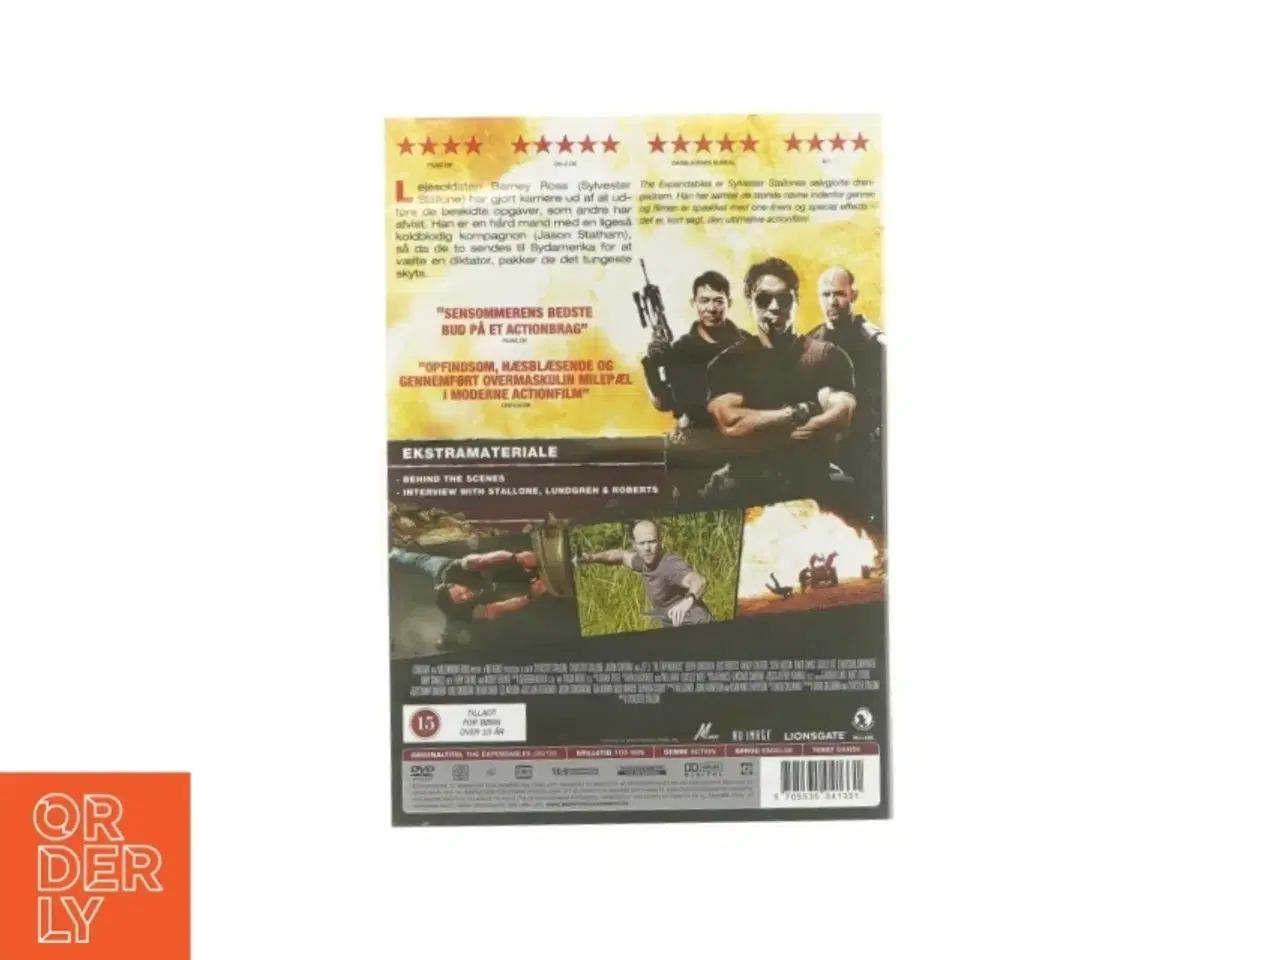 Billede 2 - The expendables (DVD)